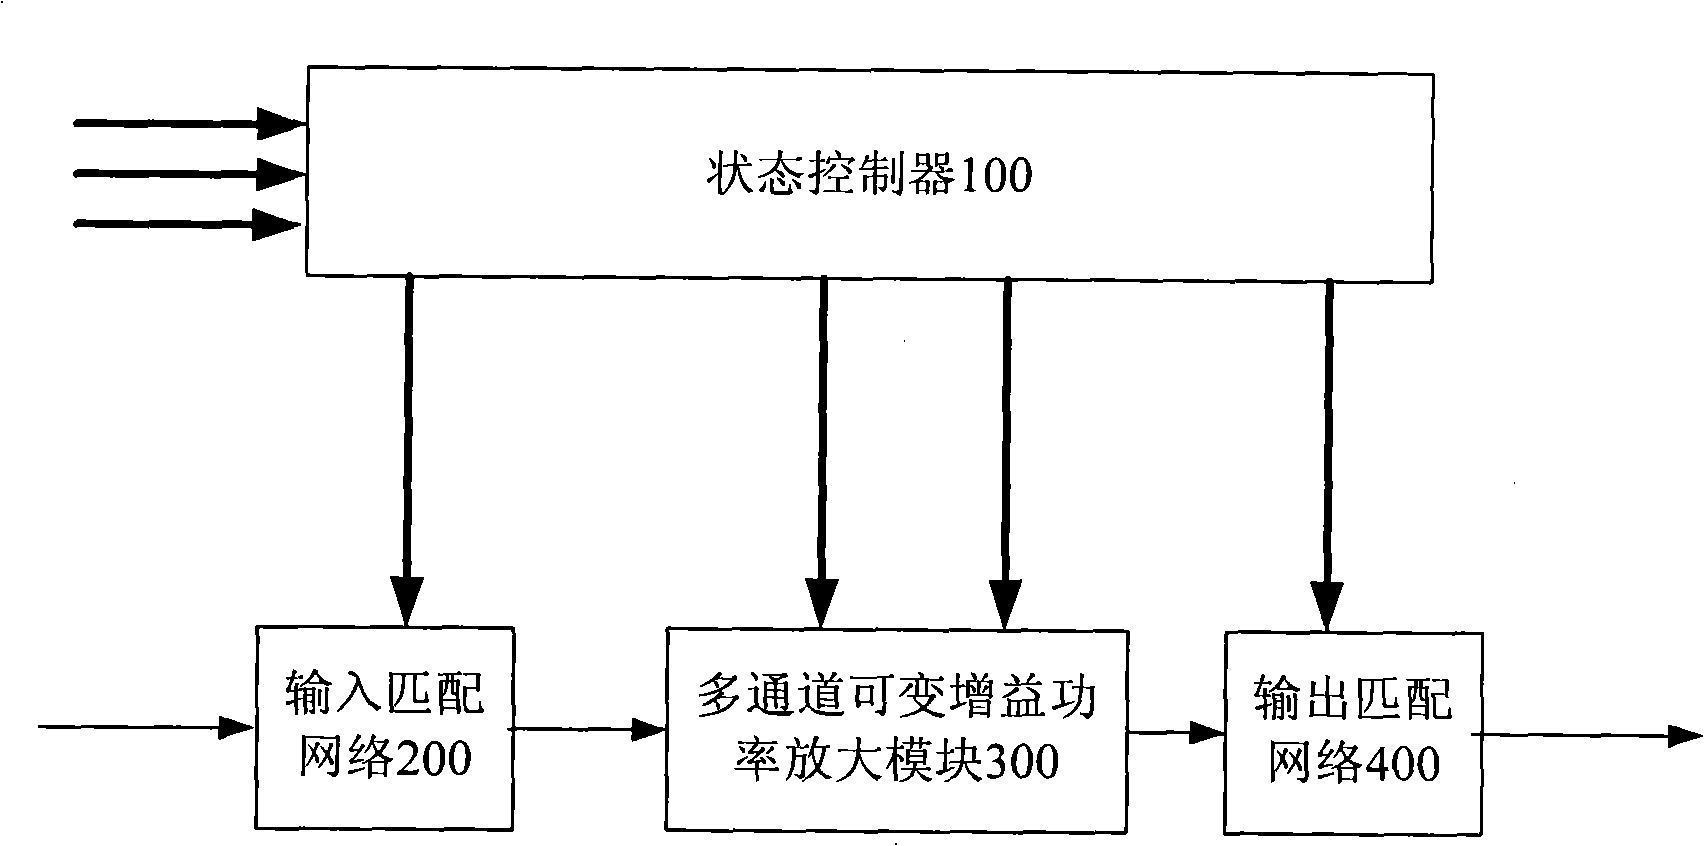 Variable gain power amplifier for multi-channel self-adapted matching network